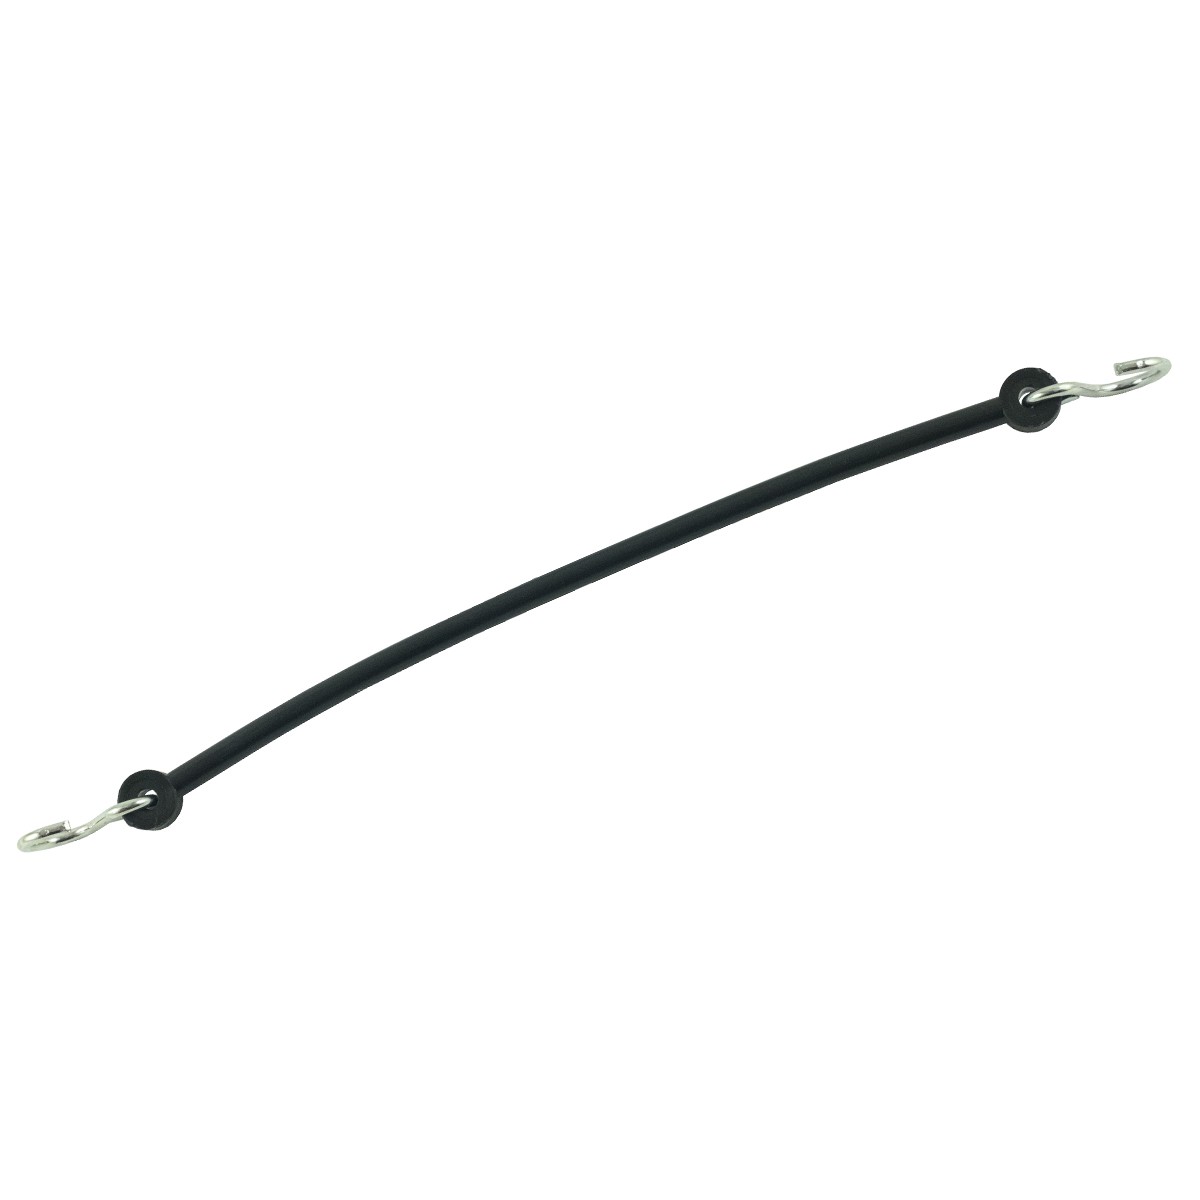 Rubber band 190 mm / three-point rubber / rubber spring for three-point linkage slings